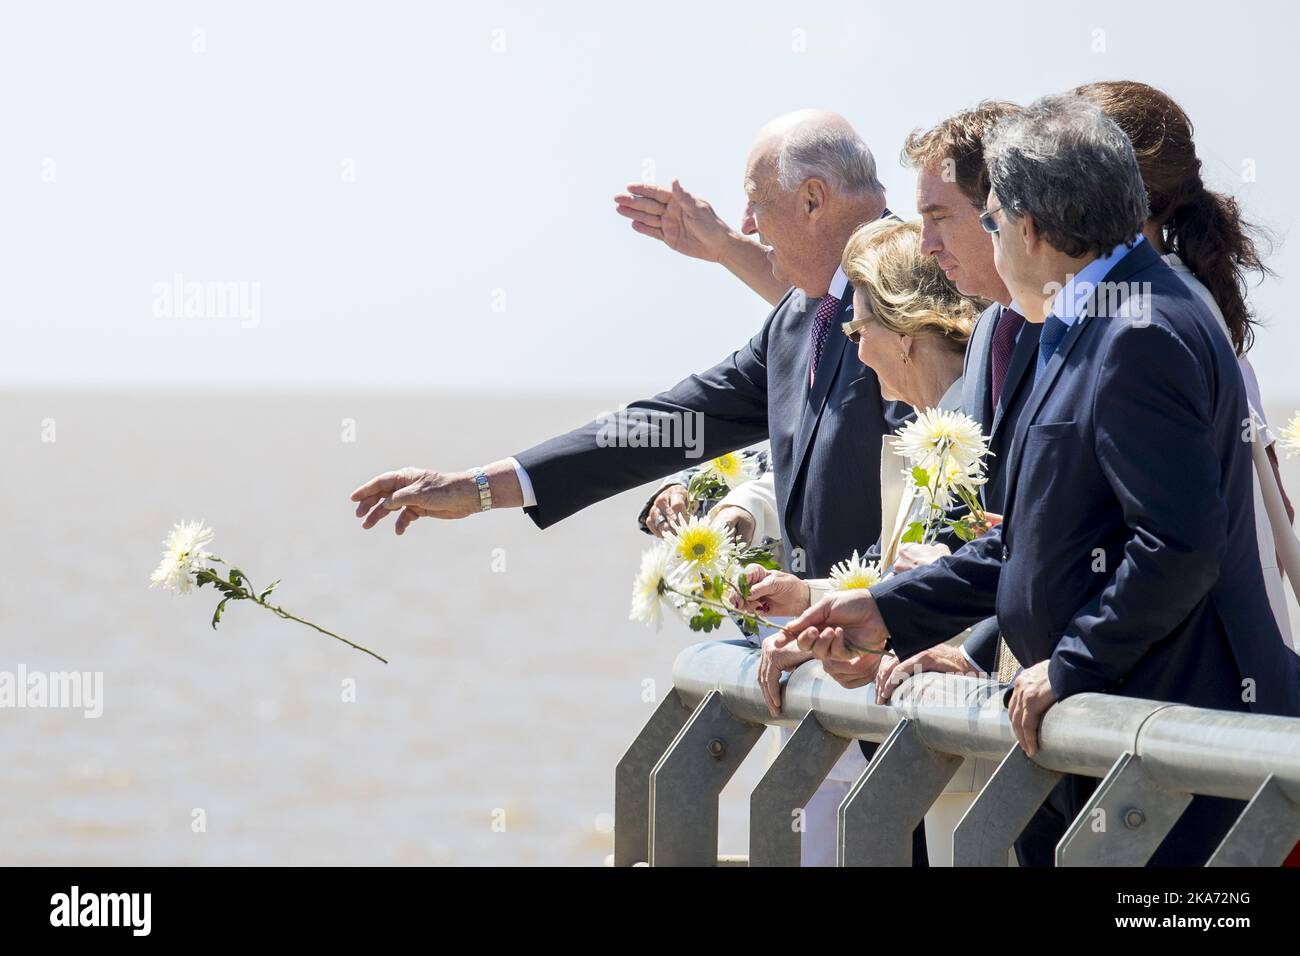 Buenos Aires, Argentina 20180307. Norway's King Harald V (left) Queen Sonja and members of human rights organizations Madres and Abuelas de Plaza de Mayo throw flowers into the River Plate to pay homage to the victims of Argentina's 1976-1983 dictatorship at the 'Parque de la Memoria' (Remembrance Park) in Buenos Aires on March 7, 2018. The park, located on the banks of the River Plate, is a monument in memory of the 30,000 people who disappeared or were killed under the 1976-1983 military regime. Photo: Heiko Junge / NTB scanpix  Stock Photo